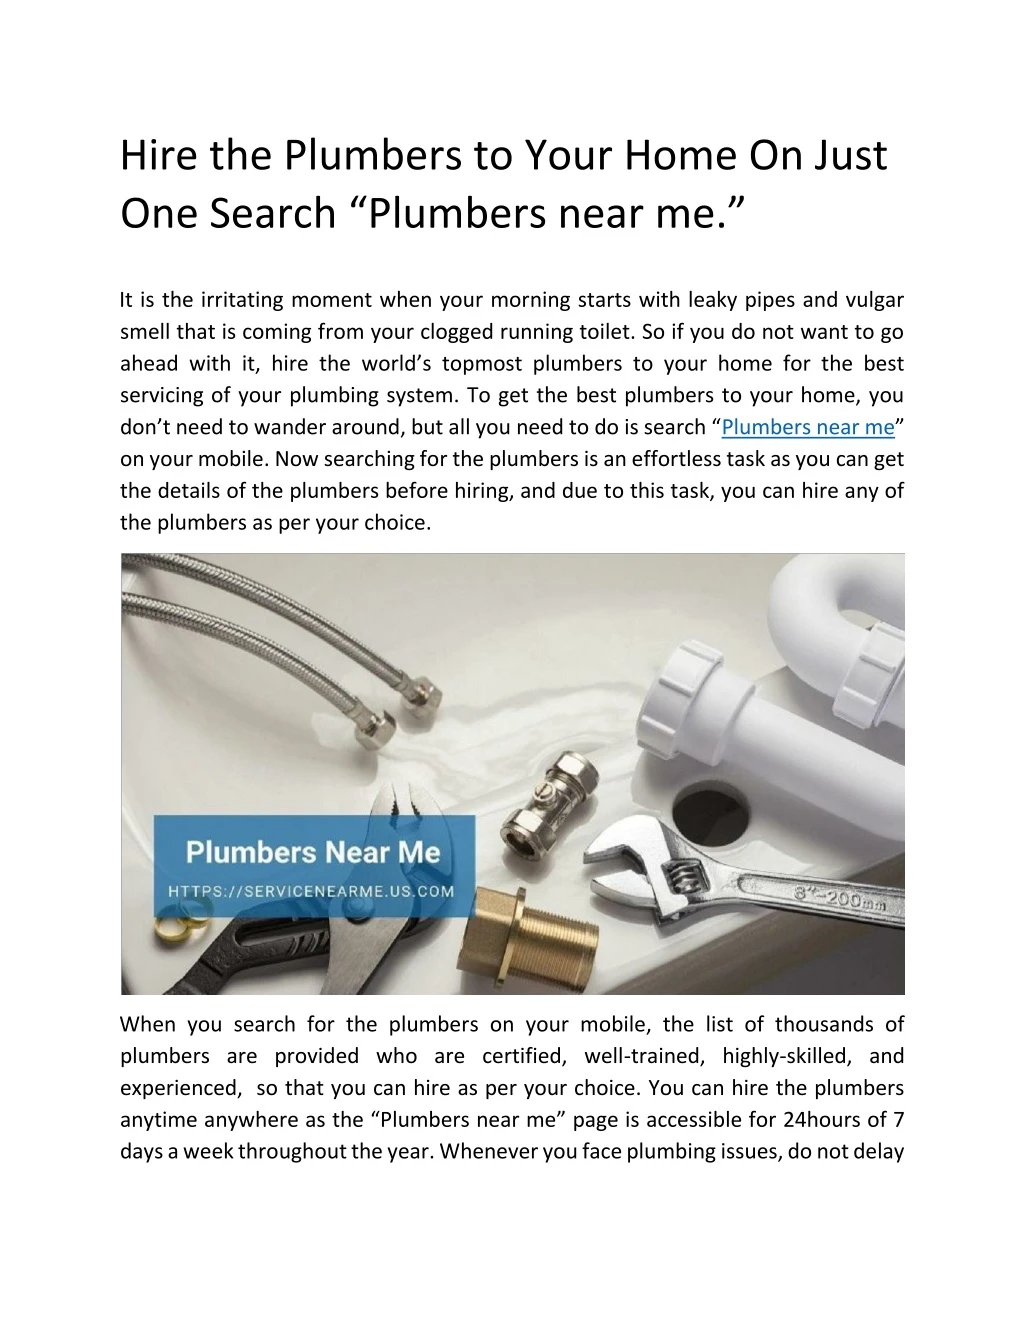 hire the plumbers to your home on just one search